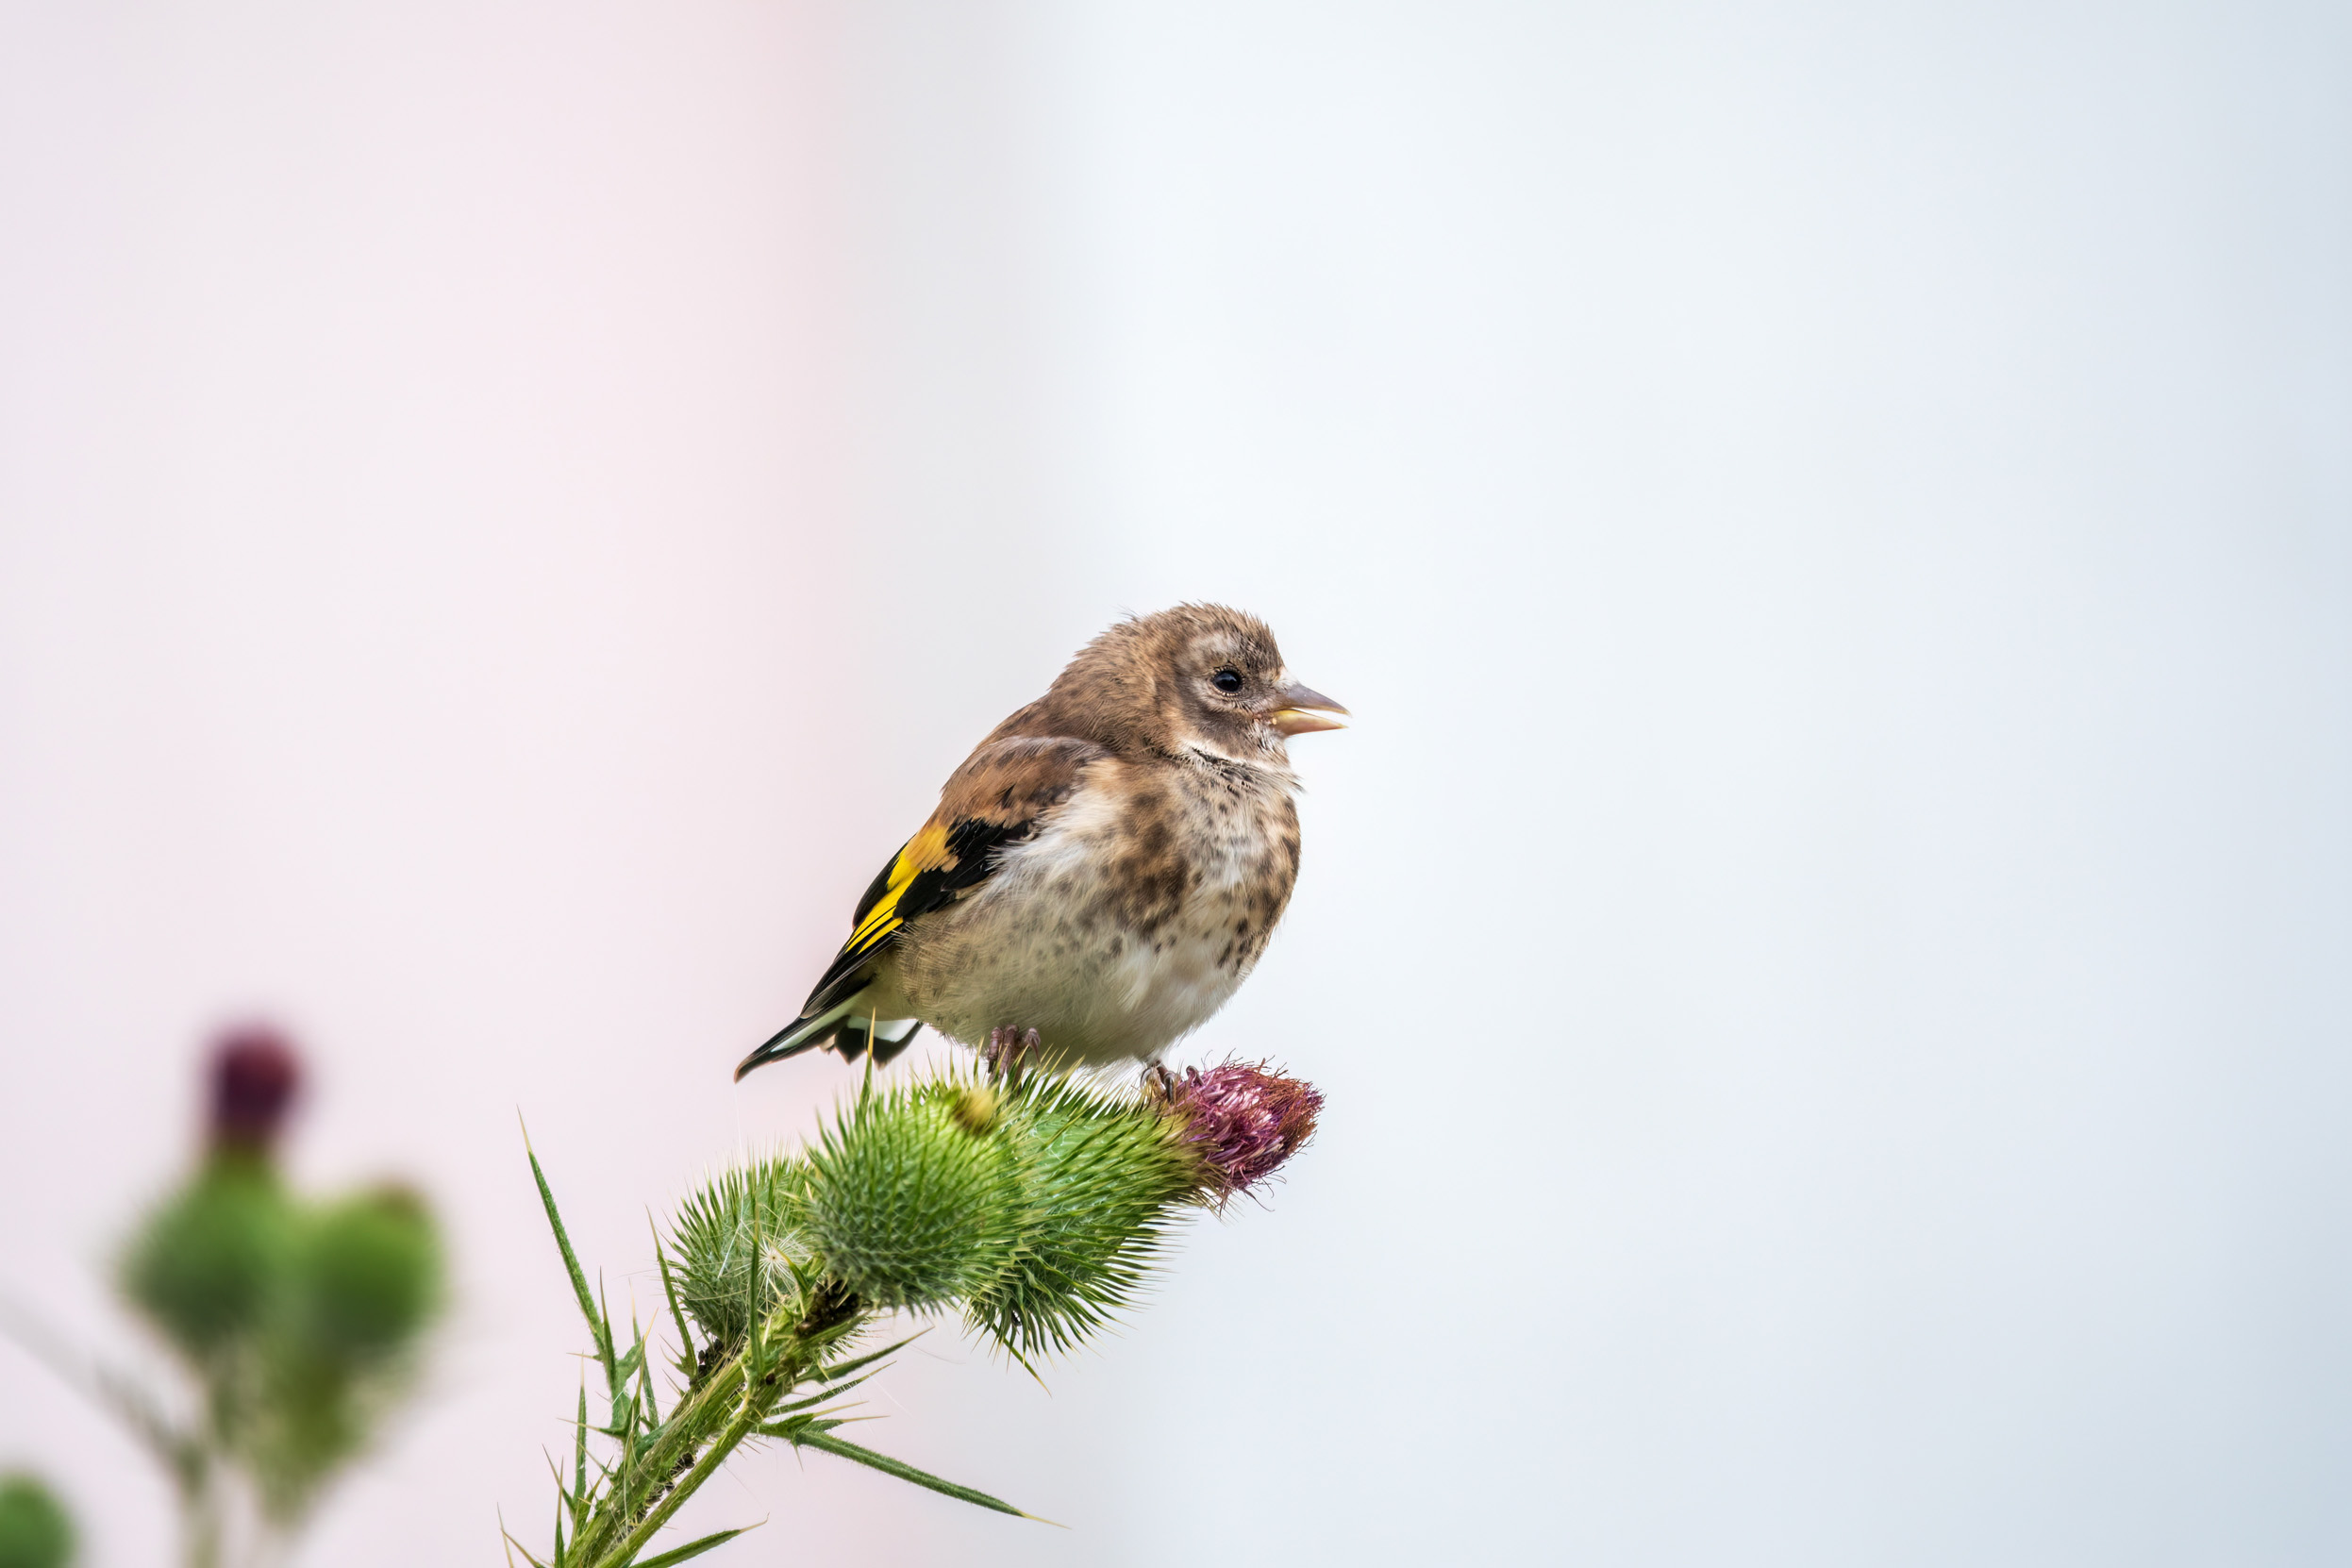 A juvenile Goldfinch perched on some thistles.